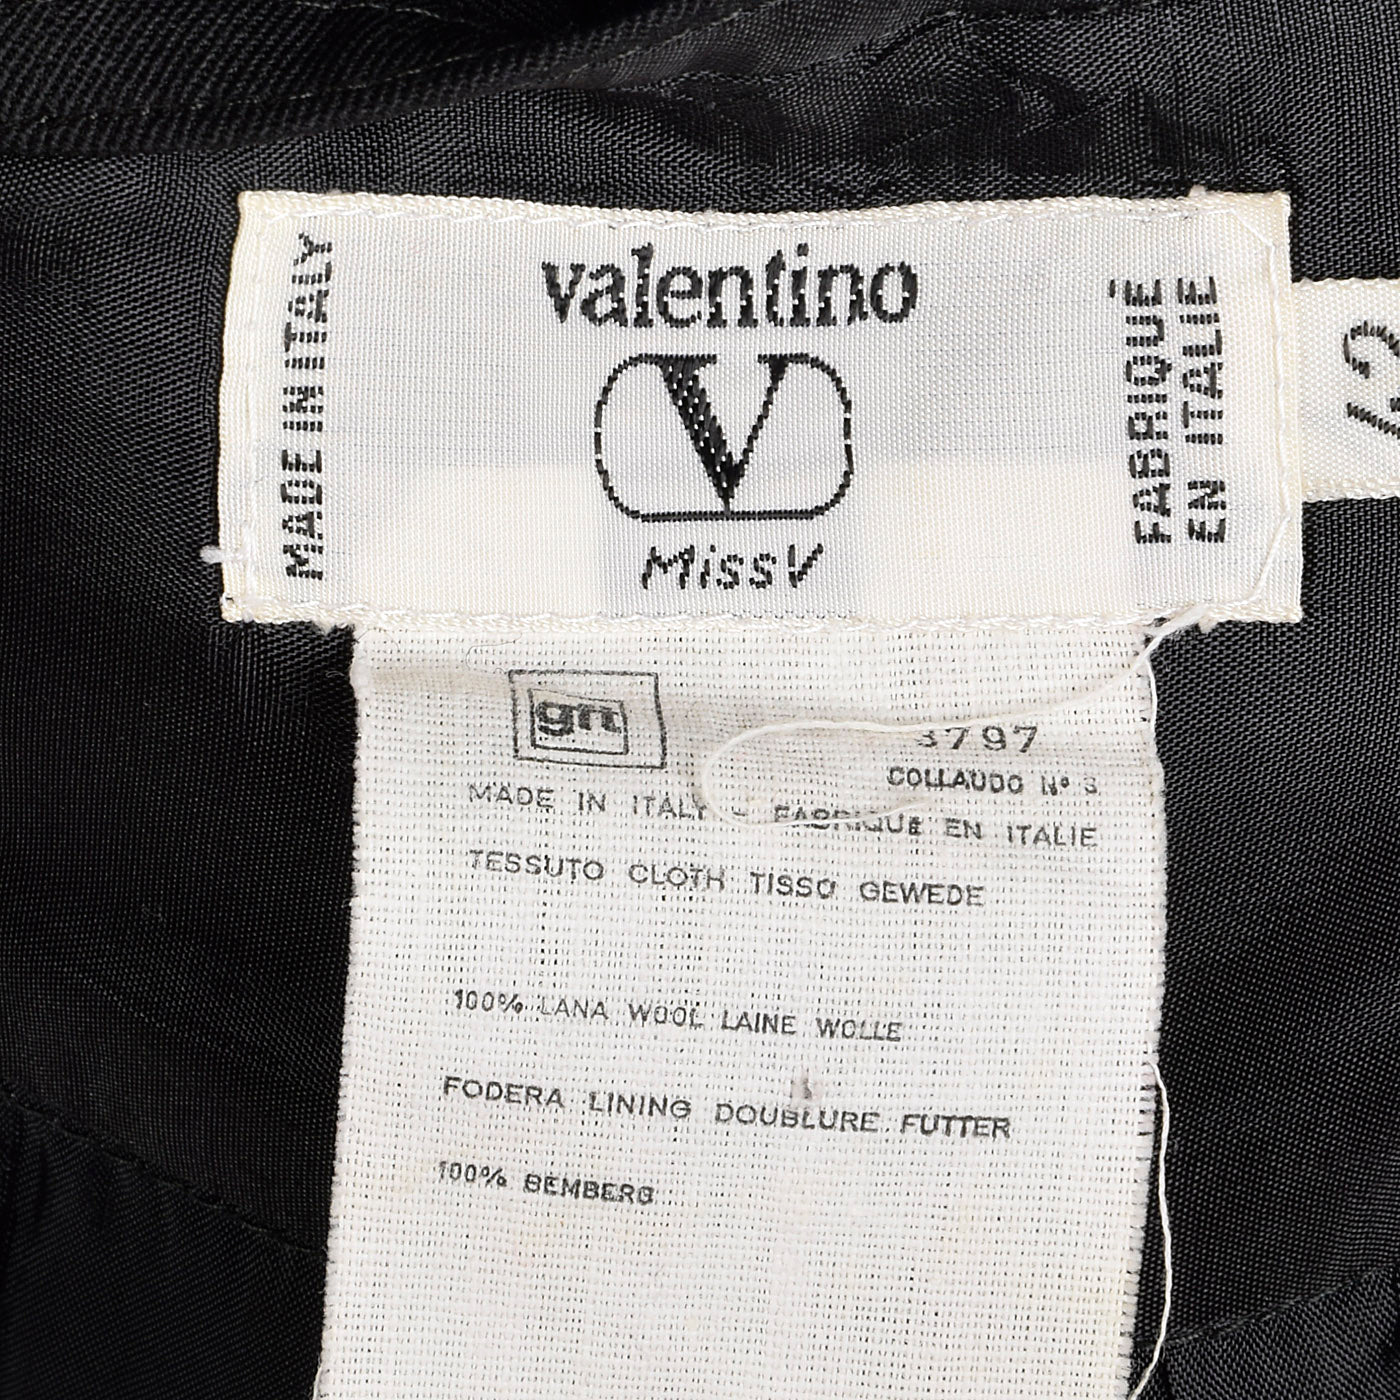 1990s Valentino Black Wool Sack Dress with a Pleated Back